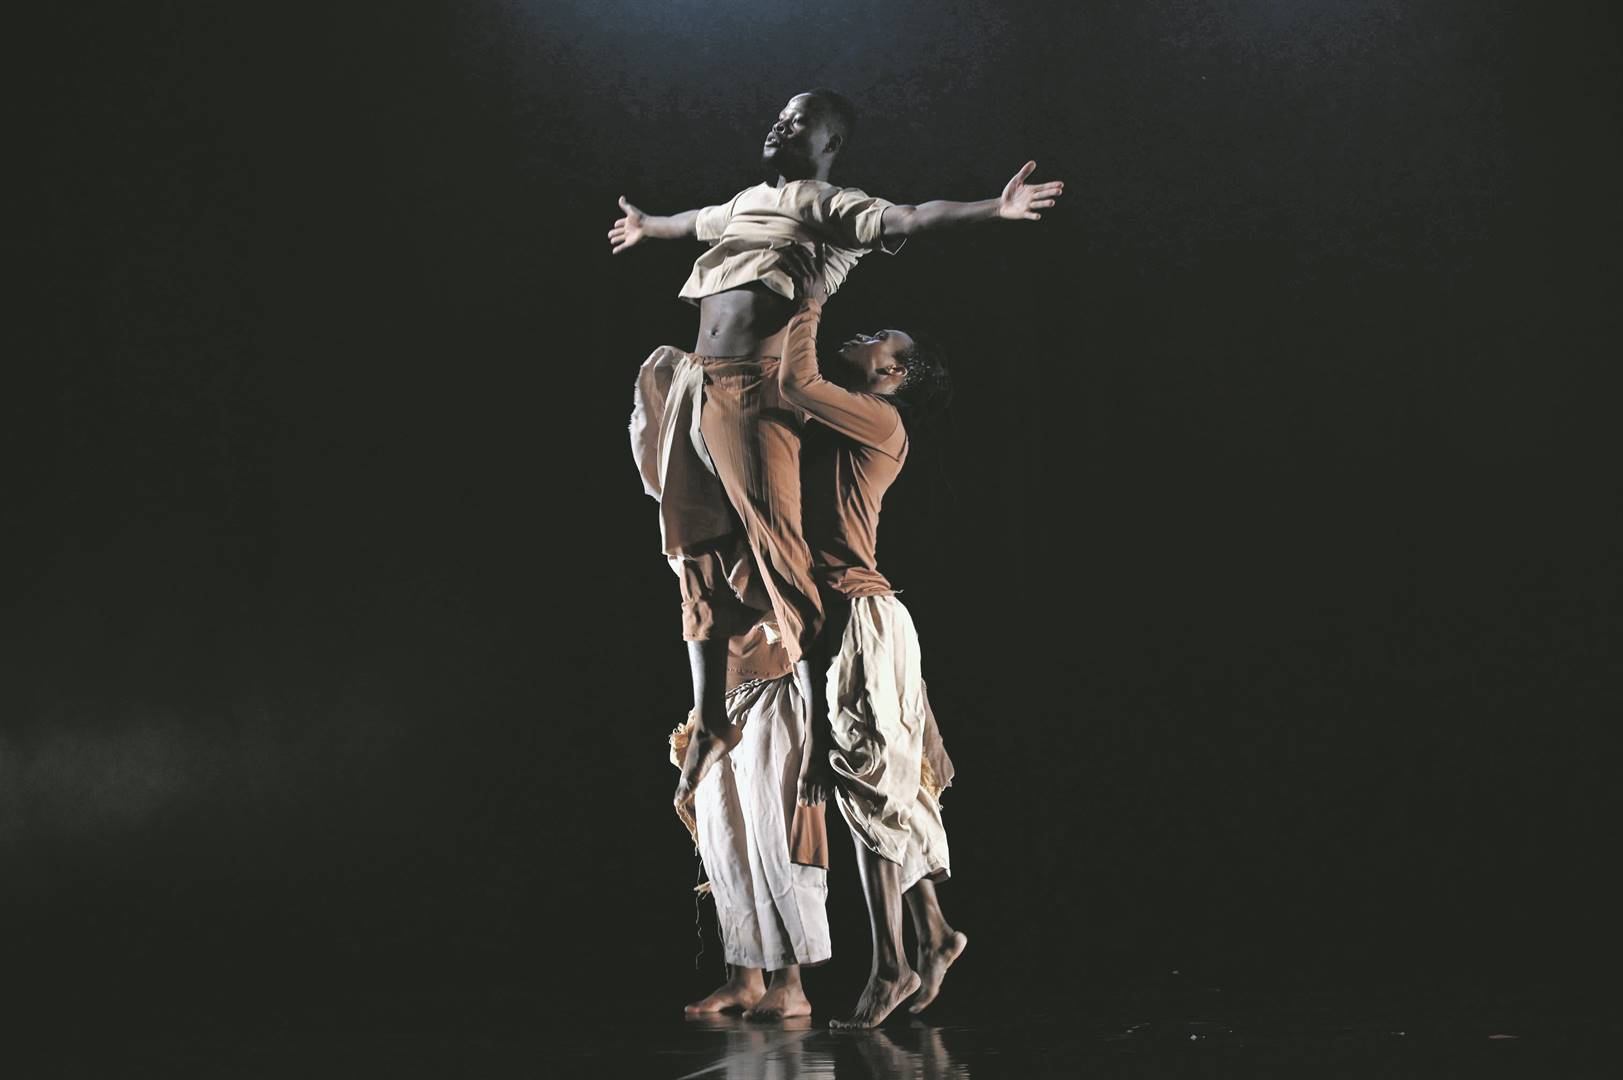 To mark its 21st birthday, the Flatfoot Dance Company in Durban is preparing ashow which will mesmerise audiences.